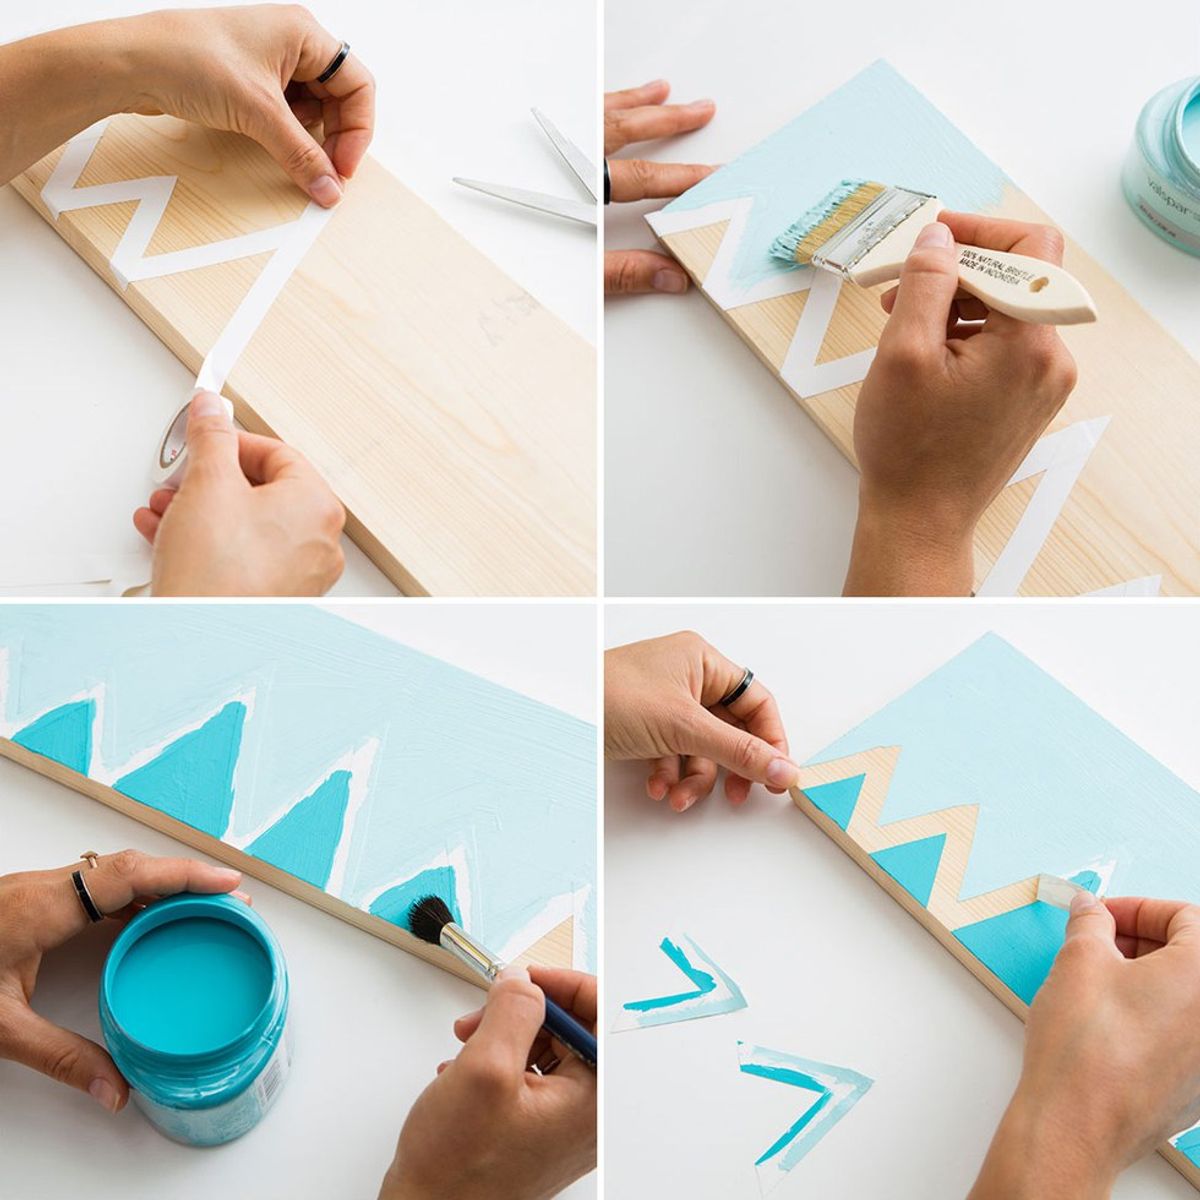 3 DIY Projects To Spruce Up Your Dorm Room